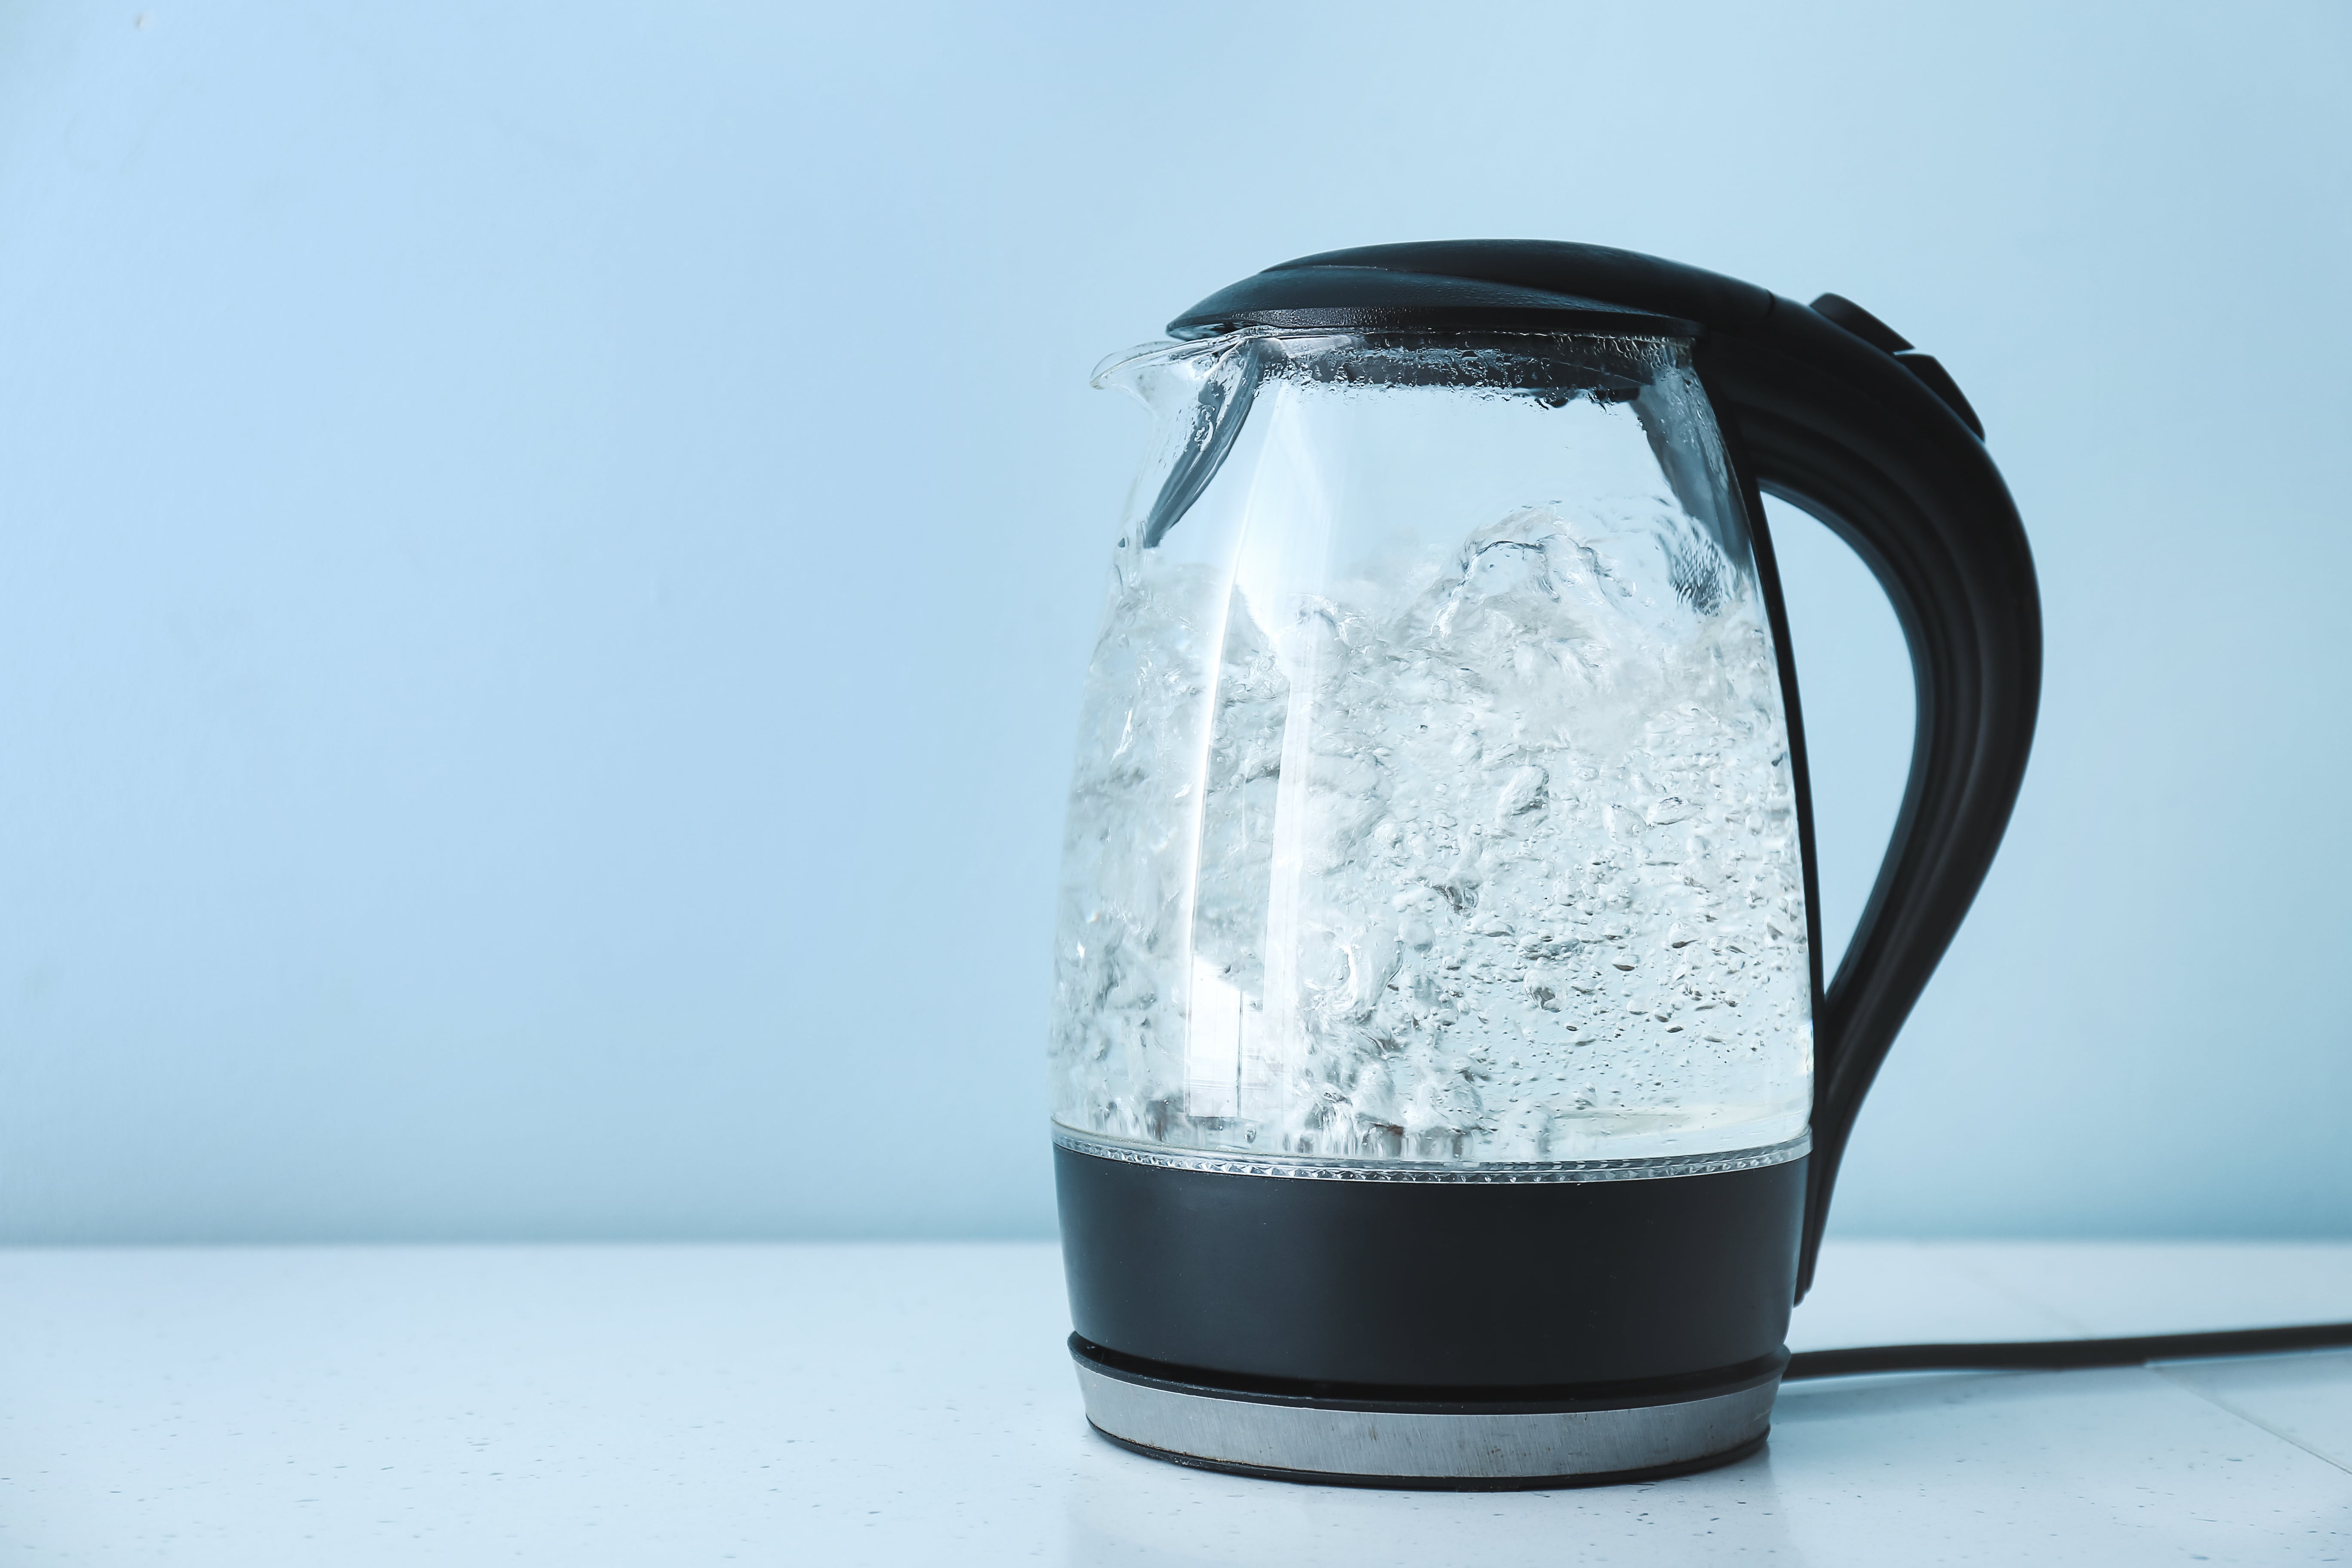 Transparent electric kettle with boiling water on table